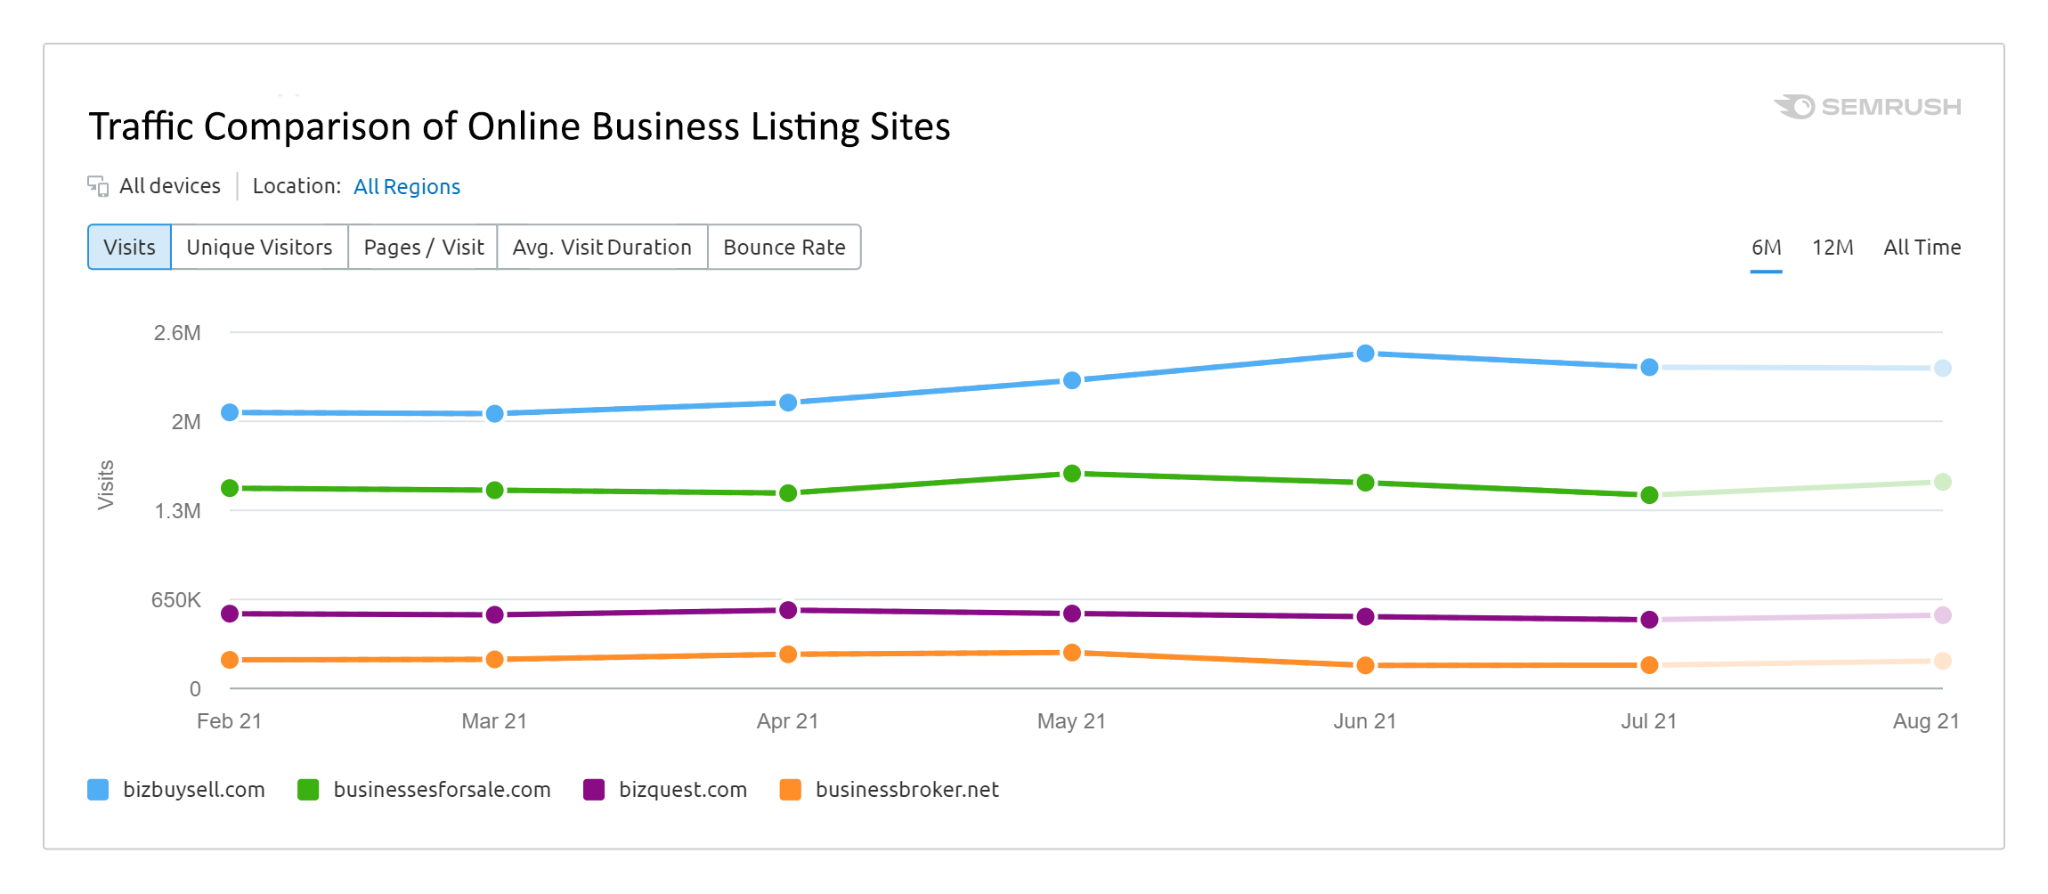 Traffic comparison of online business listing sites